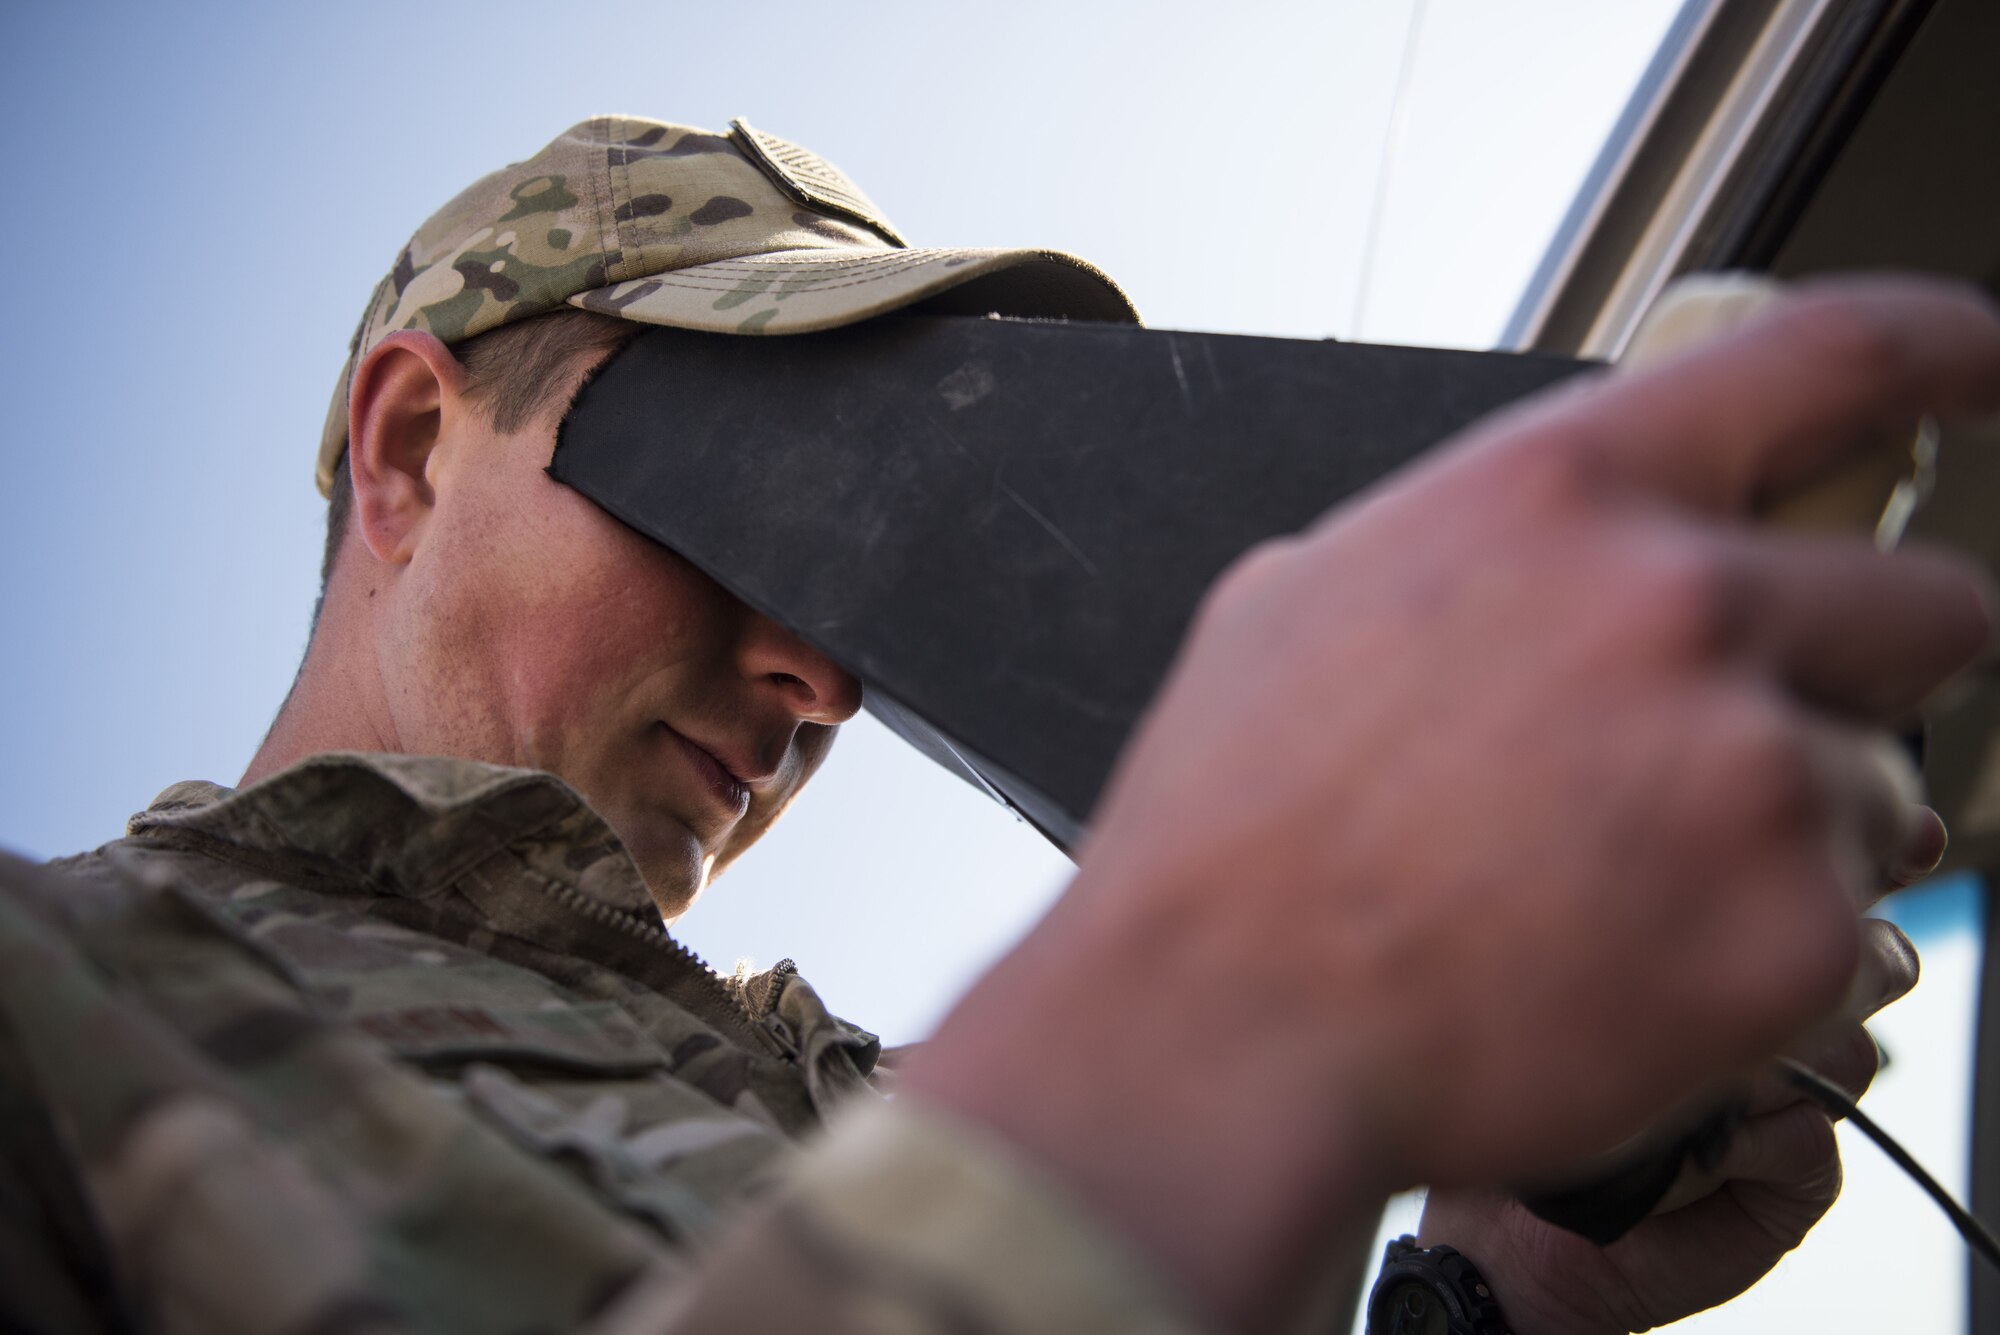 Staff Sgt. Zachary Green, assigned to the 332d Expeditionary Security Forces Squadron, pilots a Raven B Digital Data Link drone via remote control during a demonstration Jan. 24, 2018 in Southwest Asia. The Raven B is an efficient solution for the 332d ESFS, which is tasked with securing an expansive installation perimeter 24 hours a day. (U.S. Air Force photo by Staff Sgt. Joshua Kleinholz)